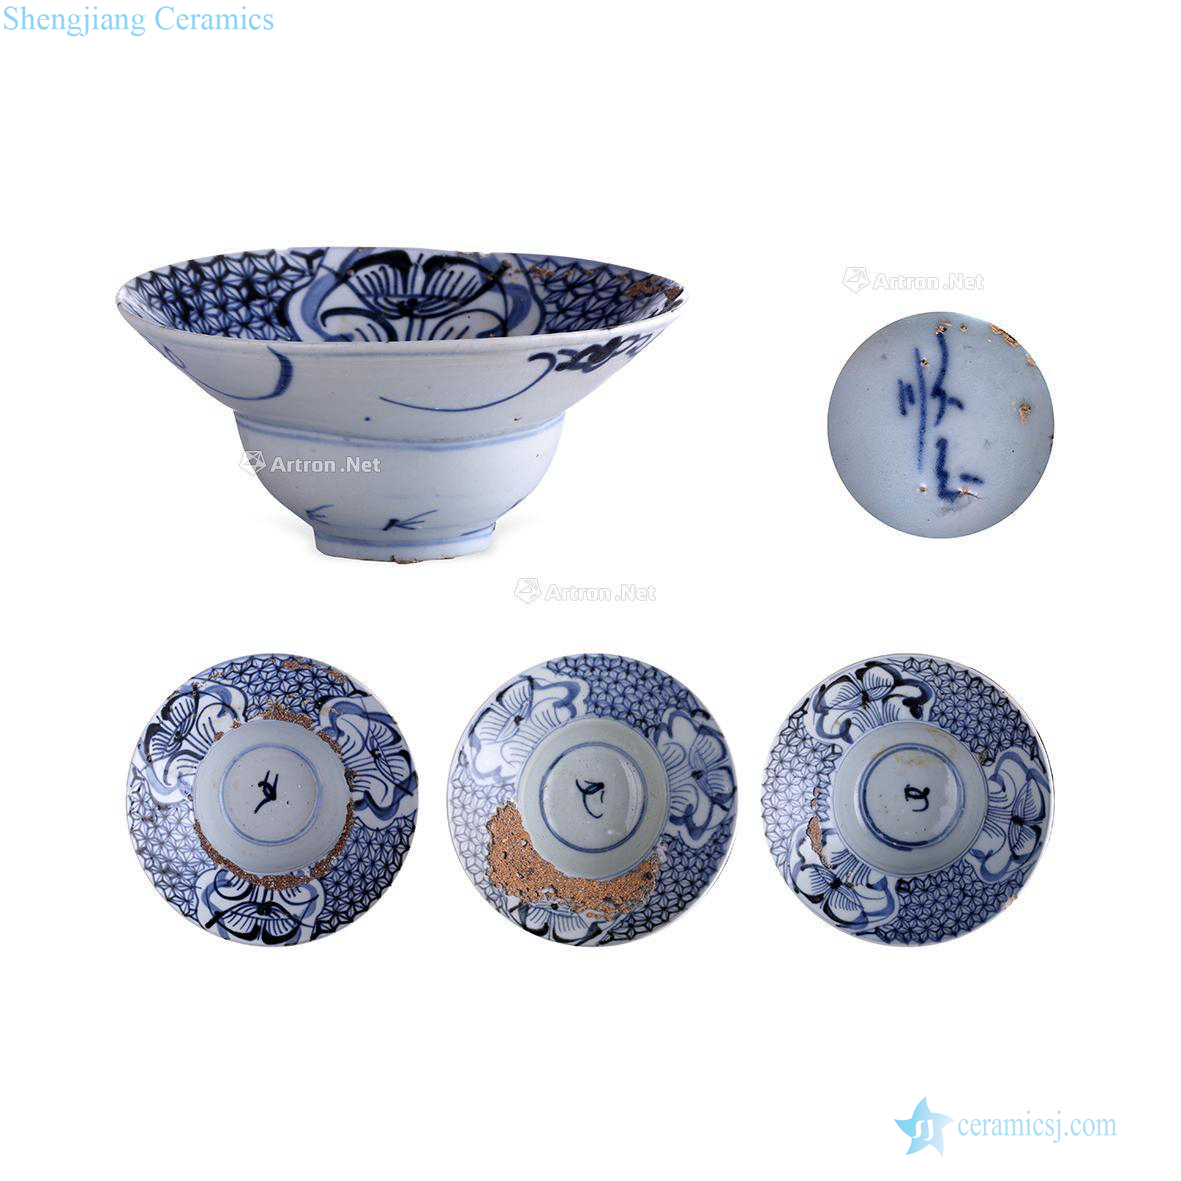 In the Ming dynasty Blue and white flower tattoos or bowl